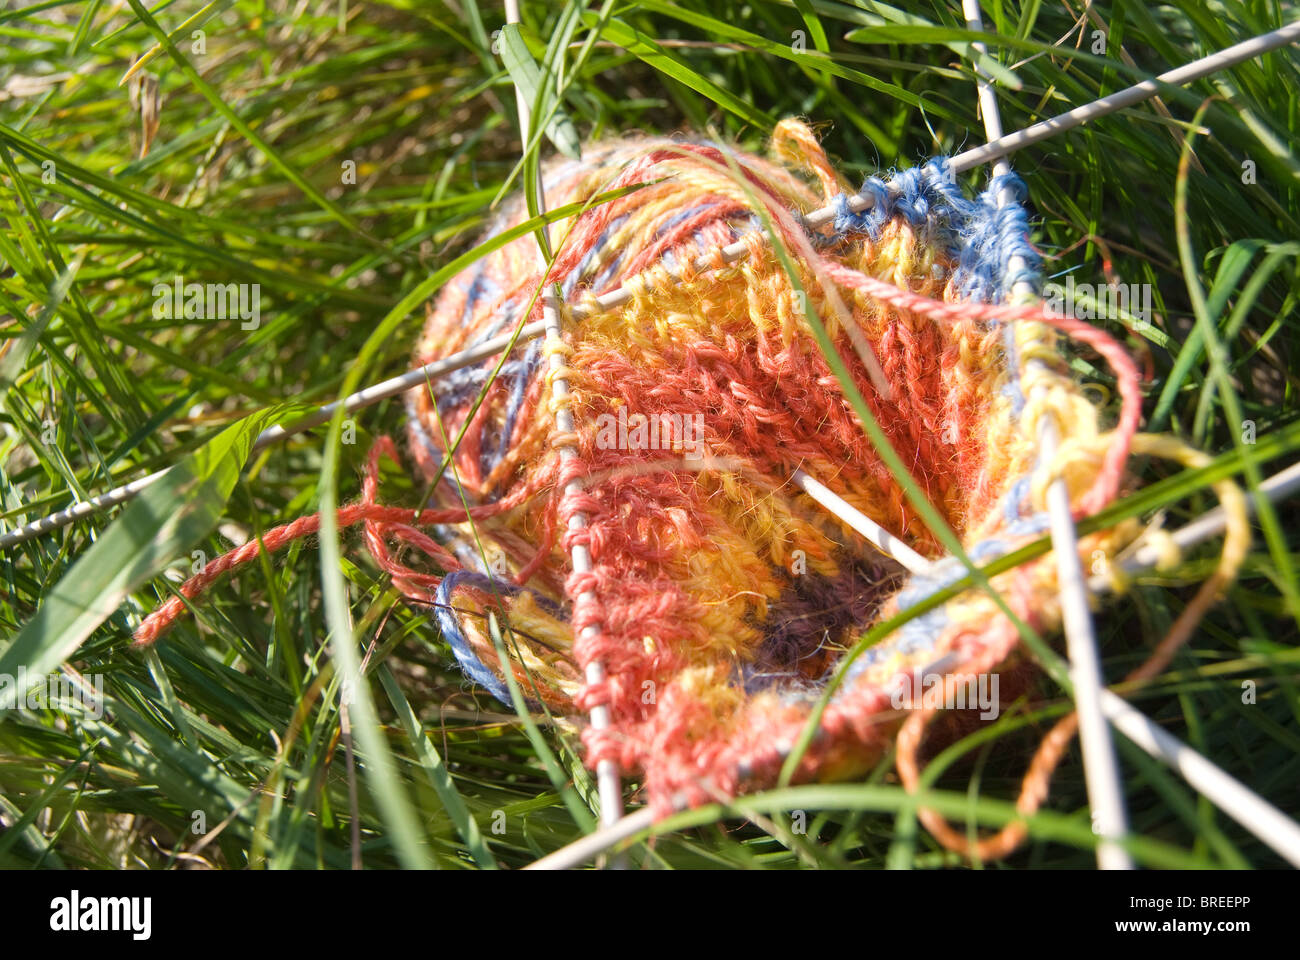 Tricolored clew with knitted pattern and five needles on green bright grass Stock Photo